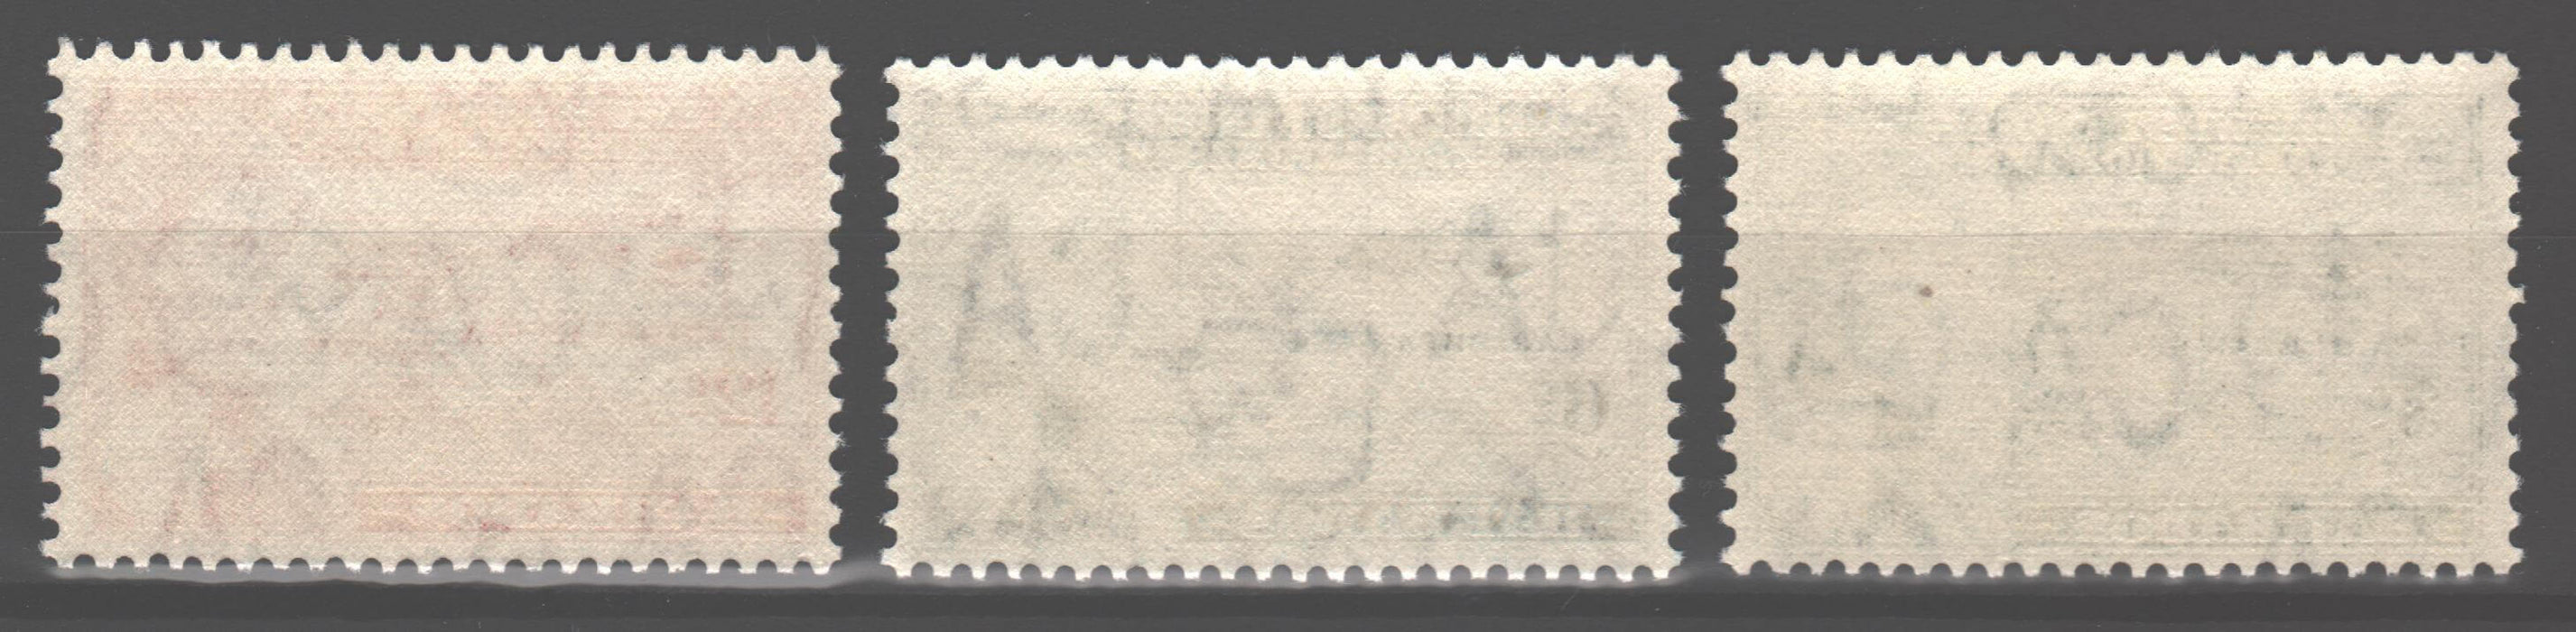 Barbados 1958 West Indies Issue Scott #248-250 c.v. 1.70$ - (TIP A) in Stamps Mall